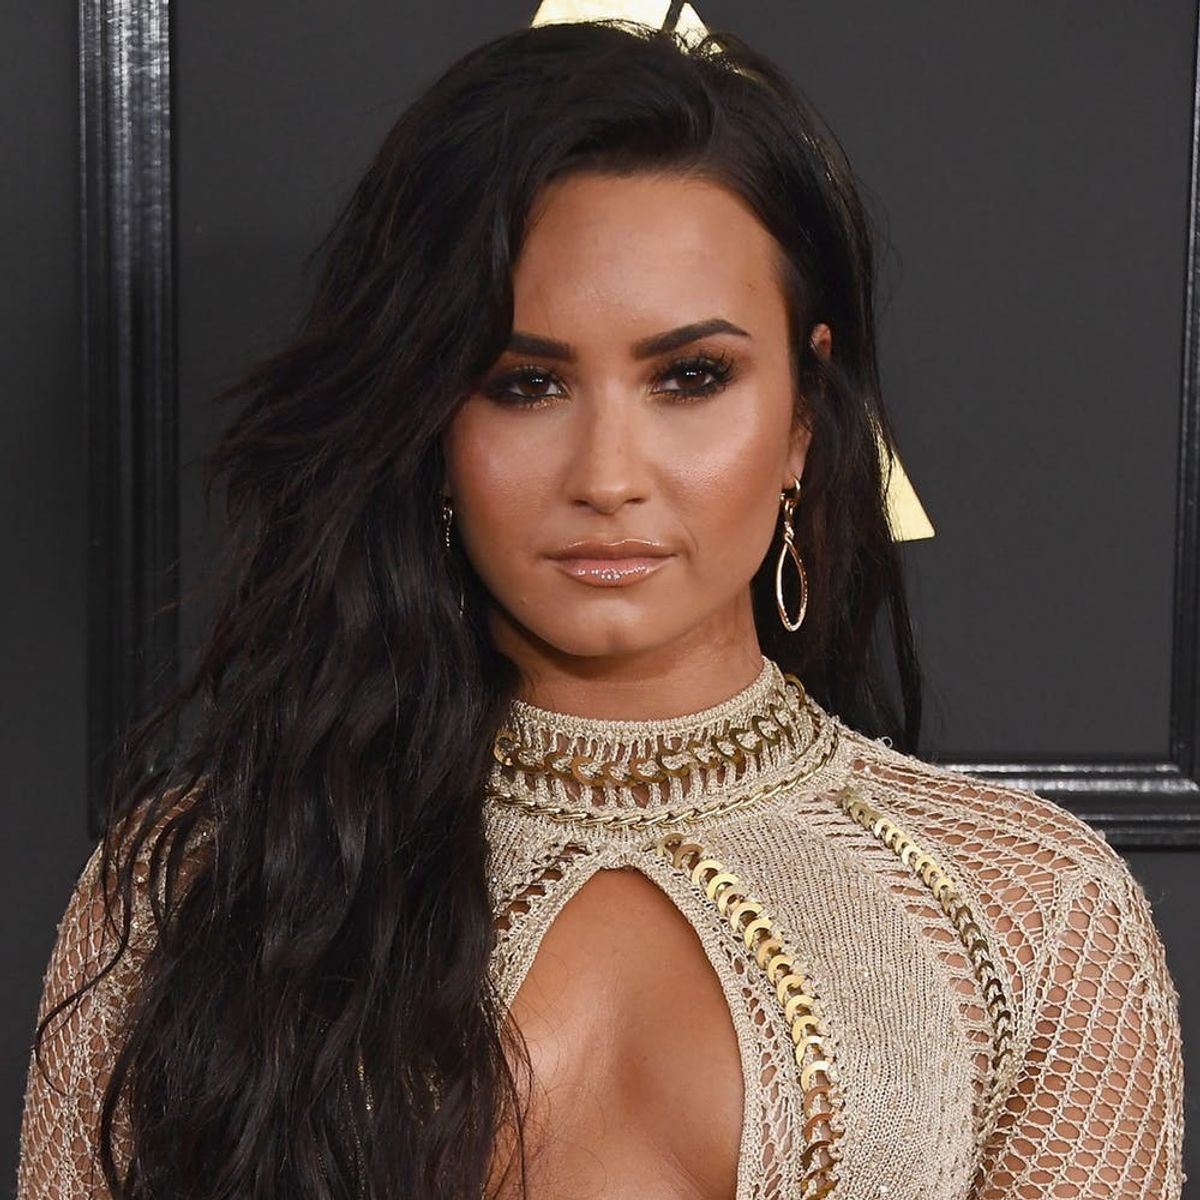 Demi Lovato Narrowly Missed an Embarrassing Wardrobe Malfunction at the Grammys